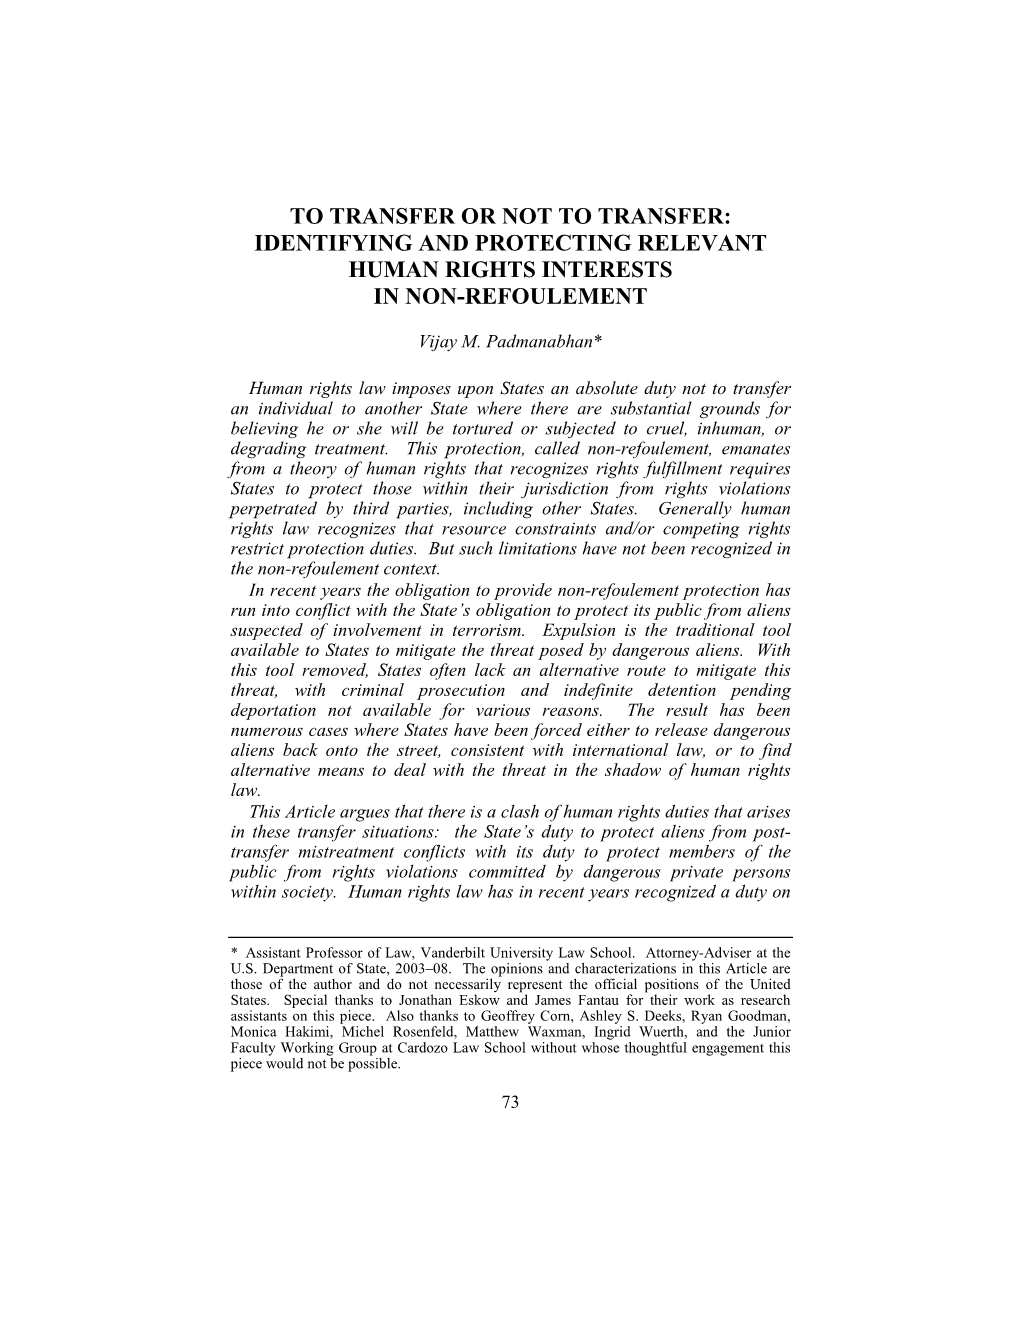 To Transfer Or Not to Transfer: Identifying and Protecting Relevant Human Rights Interests in Non-Refoulement